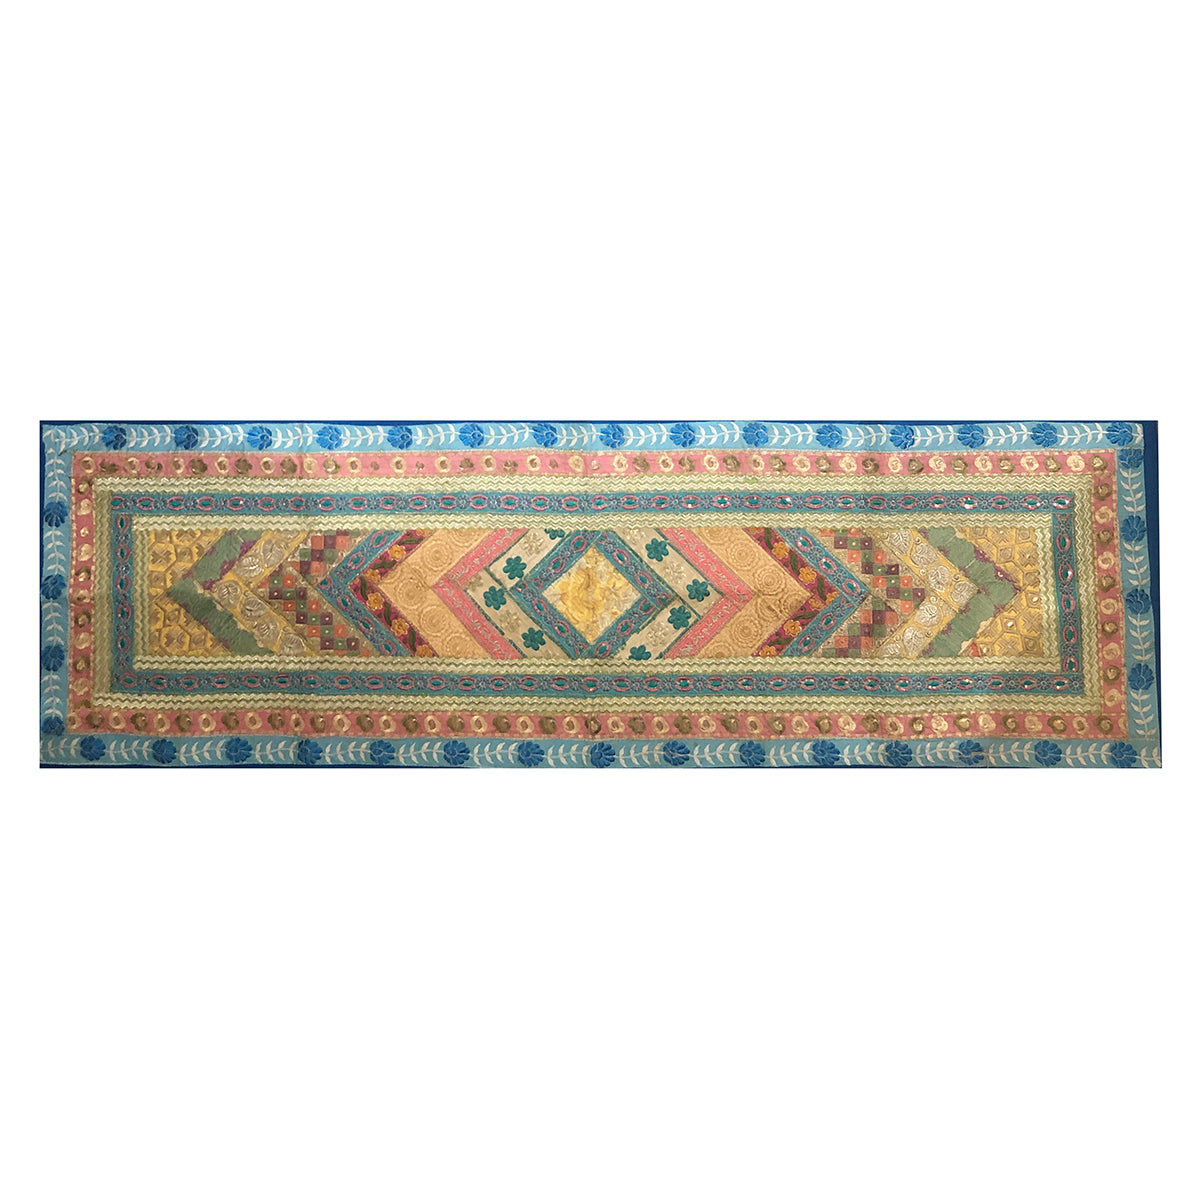 Wall hanging /runner 03 - Vintage India NYC